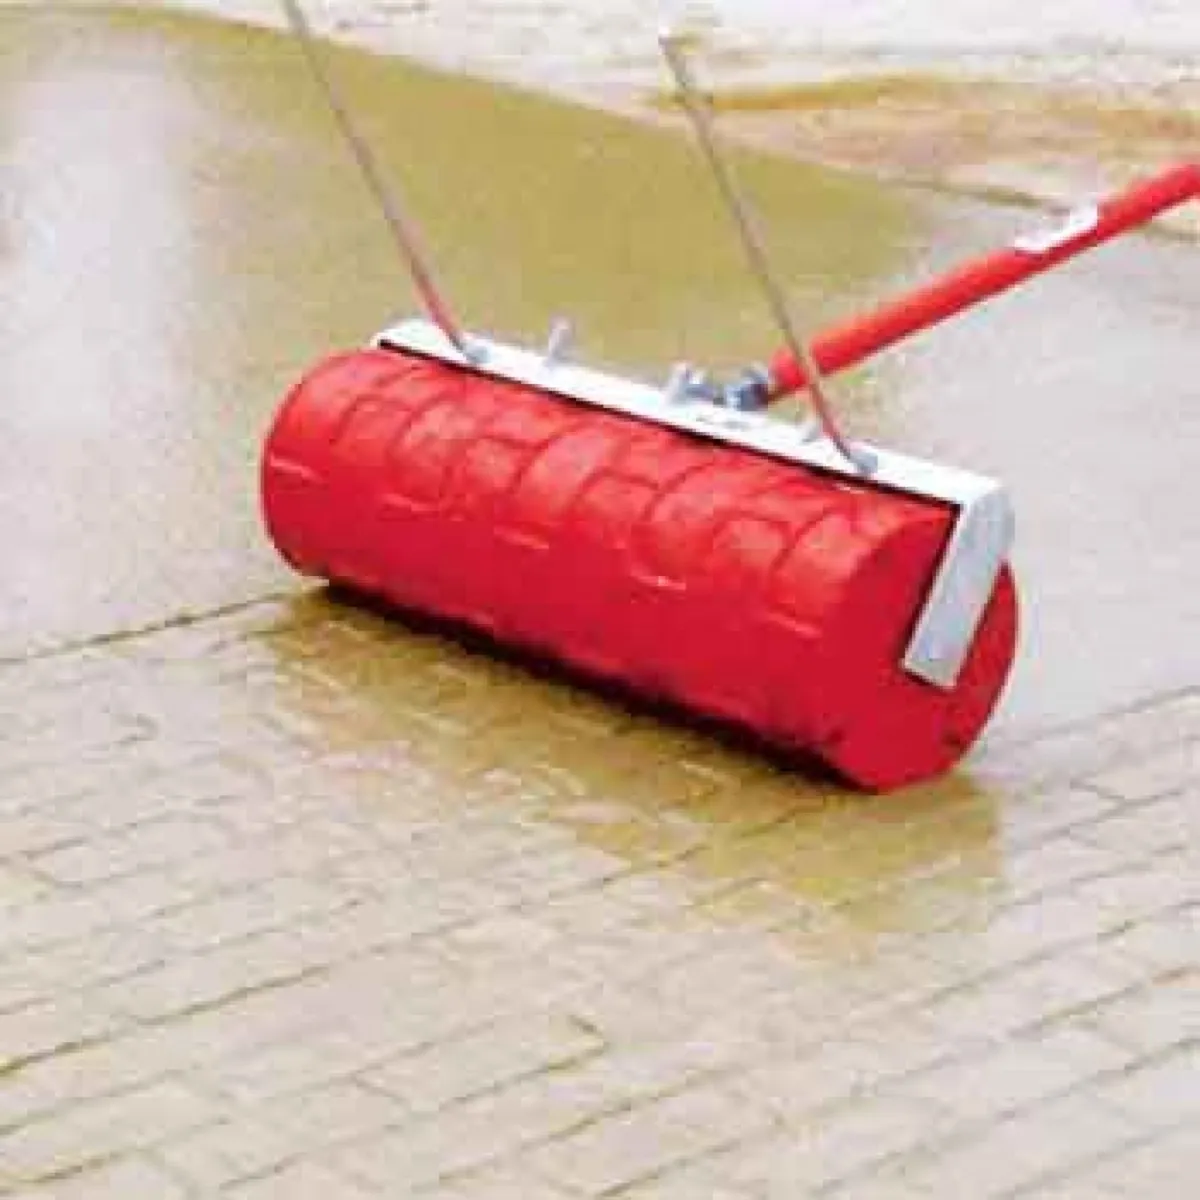 LIGHTWEIGHT CONCRETE VIBRATING SCREED POWERED